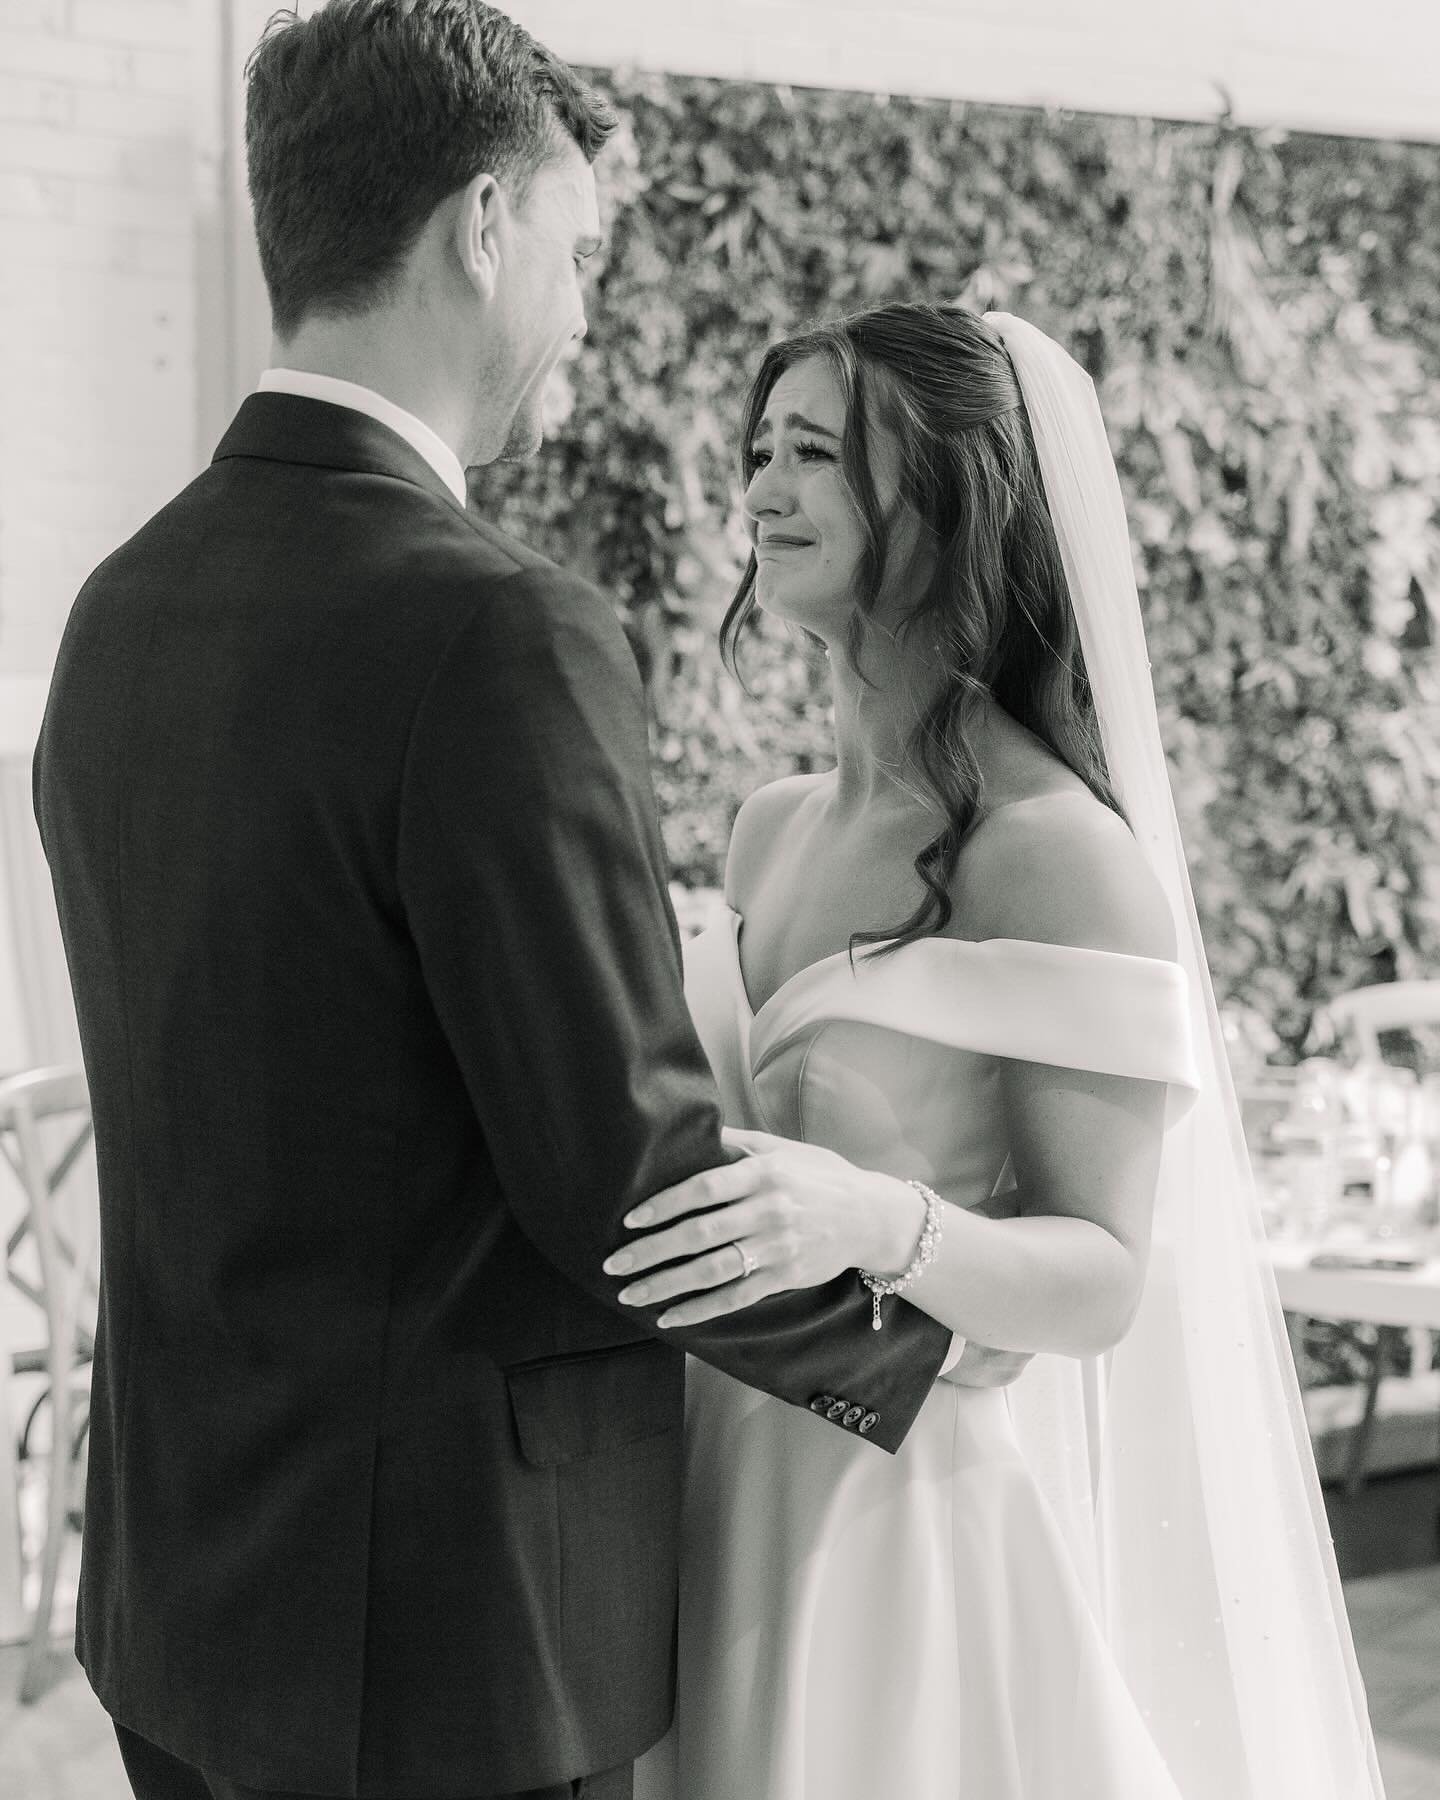 The most beautiful first look&hellip;. 🩷 As soon as Ryan saw his bride there were ZERO dry eyes in the room. They had a sweet moment and then he opened a small box that caught @gabbi.clinch so off guard, and he gifted her a GORGEOUS necklace that sh